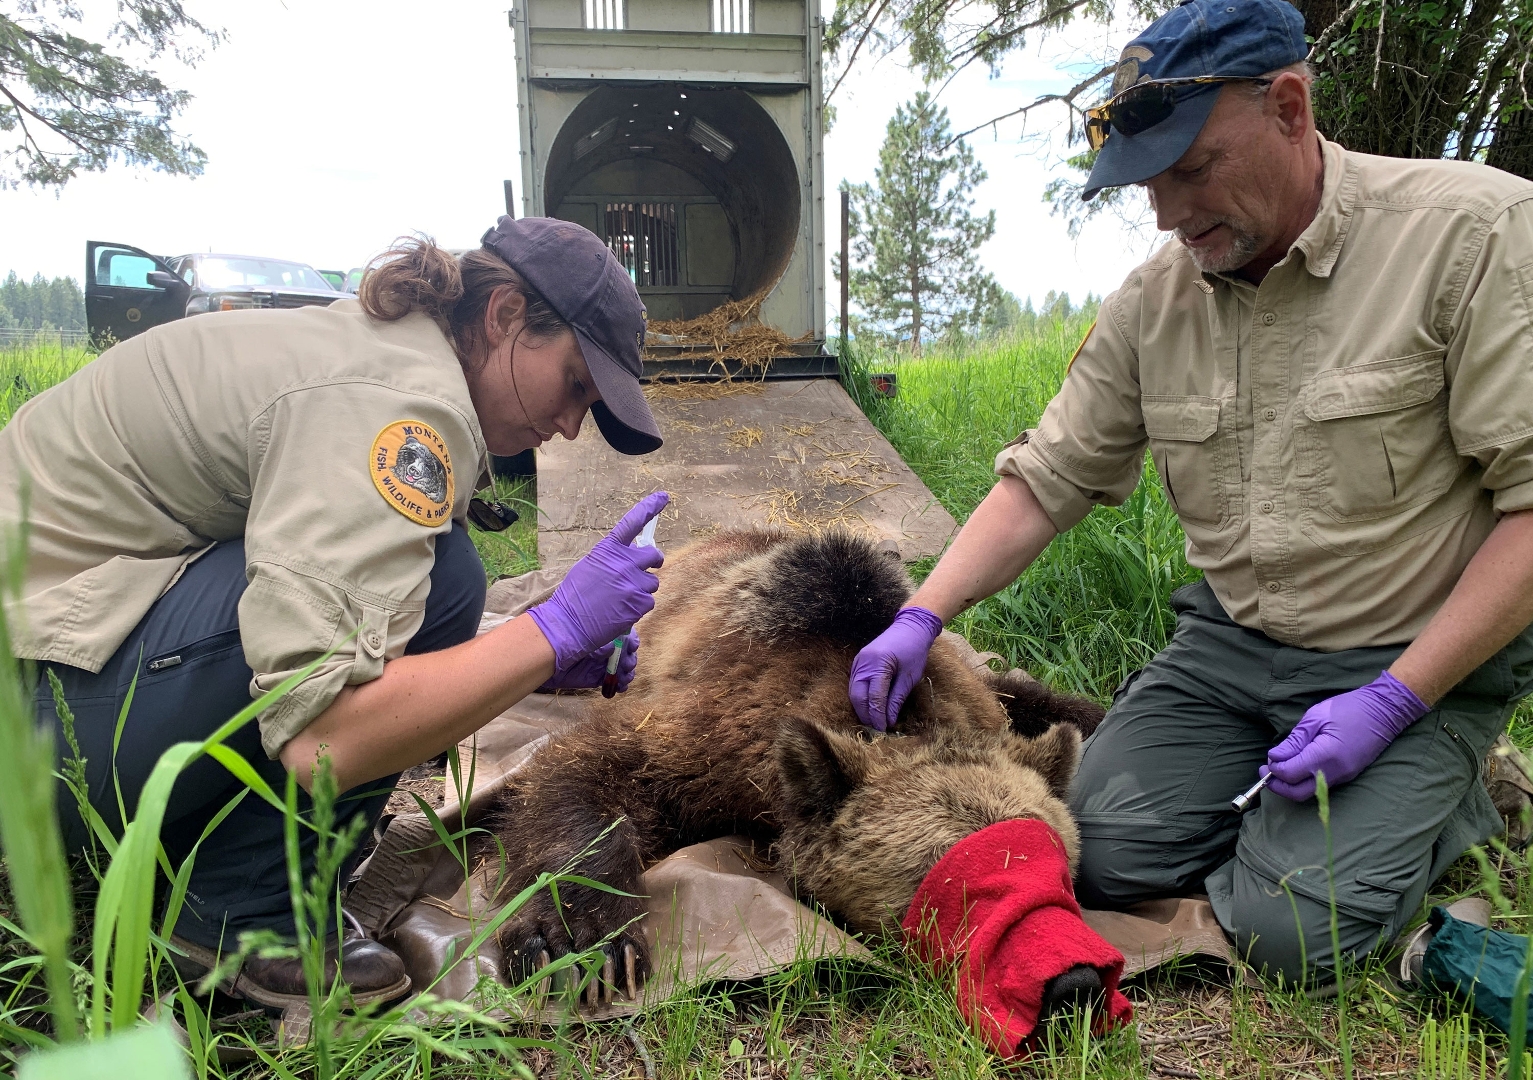 UM Study: Montanans Share Common Love Toward Grizzly Bears